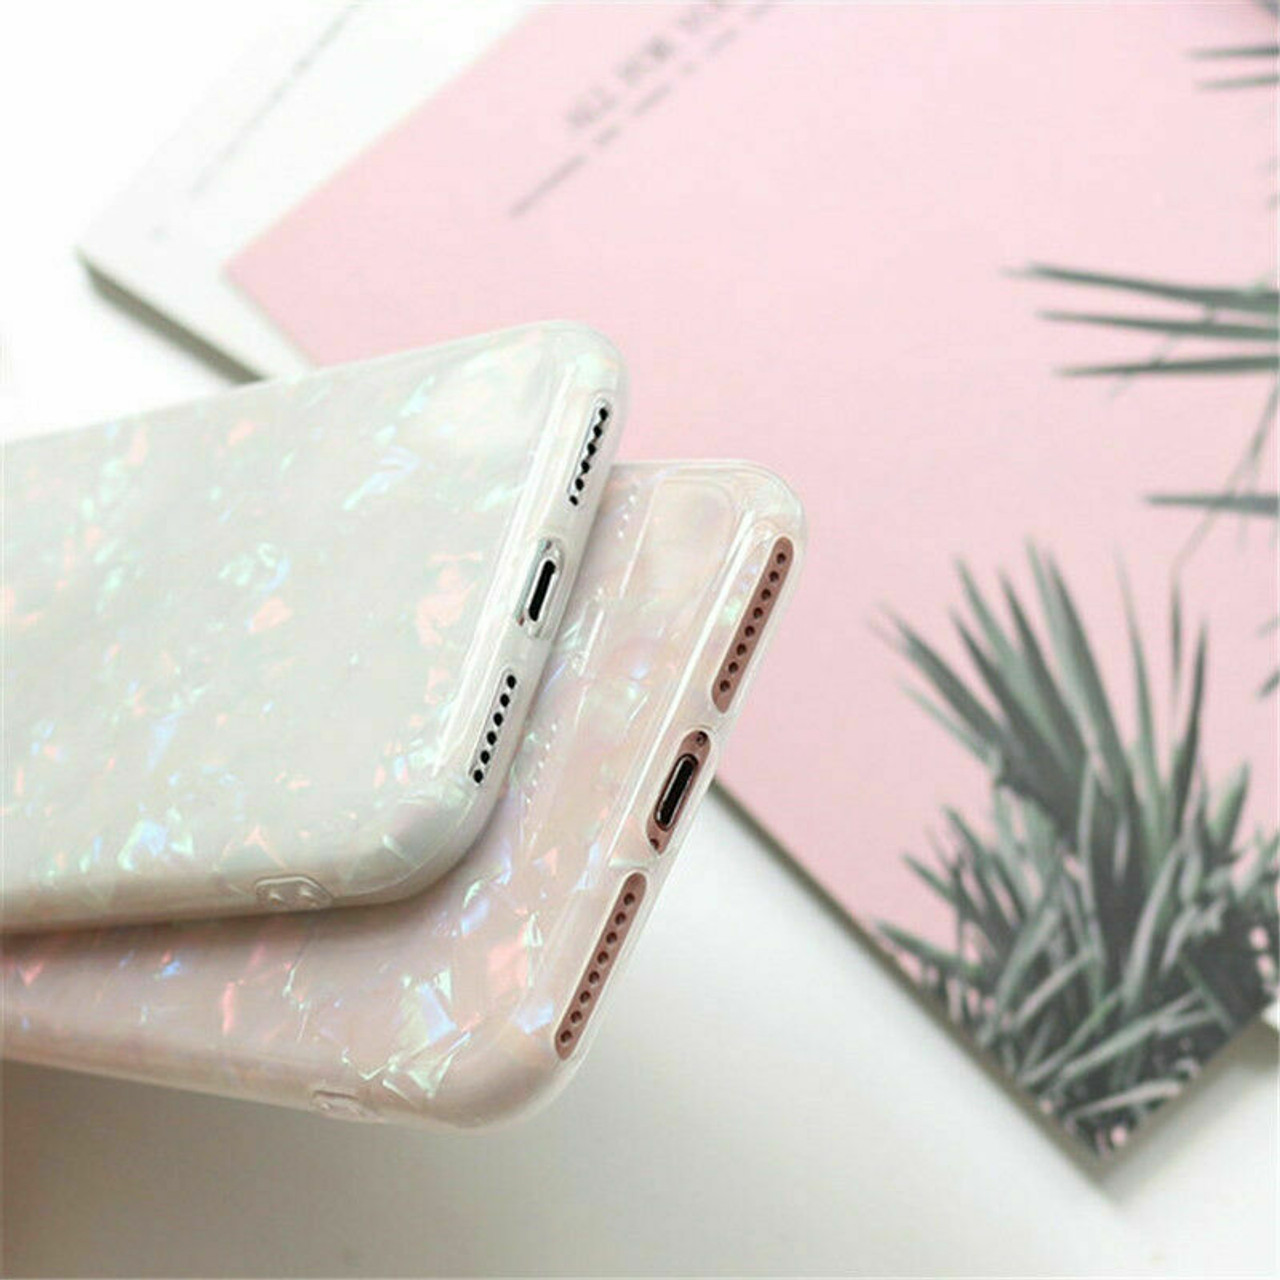 Marble Sparkle Bling Cute Case For iPhone 11 Pro Max XR XS MAX X 7 8 SE PLUS US